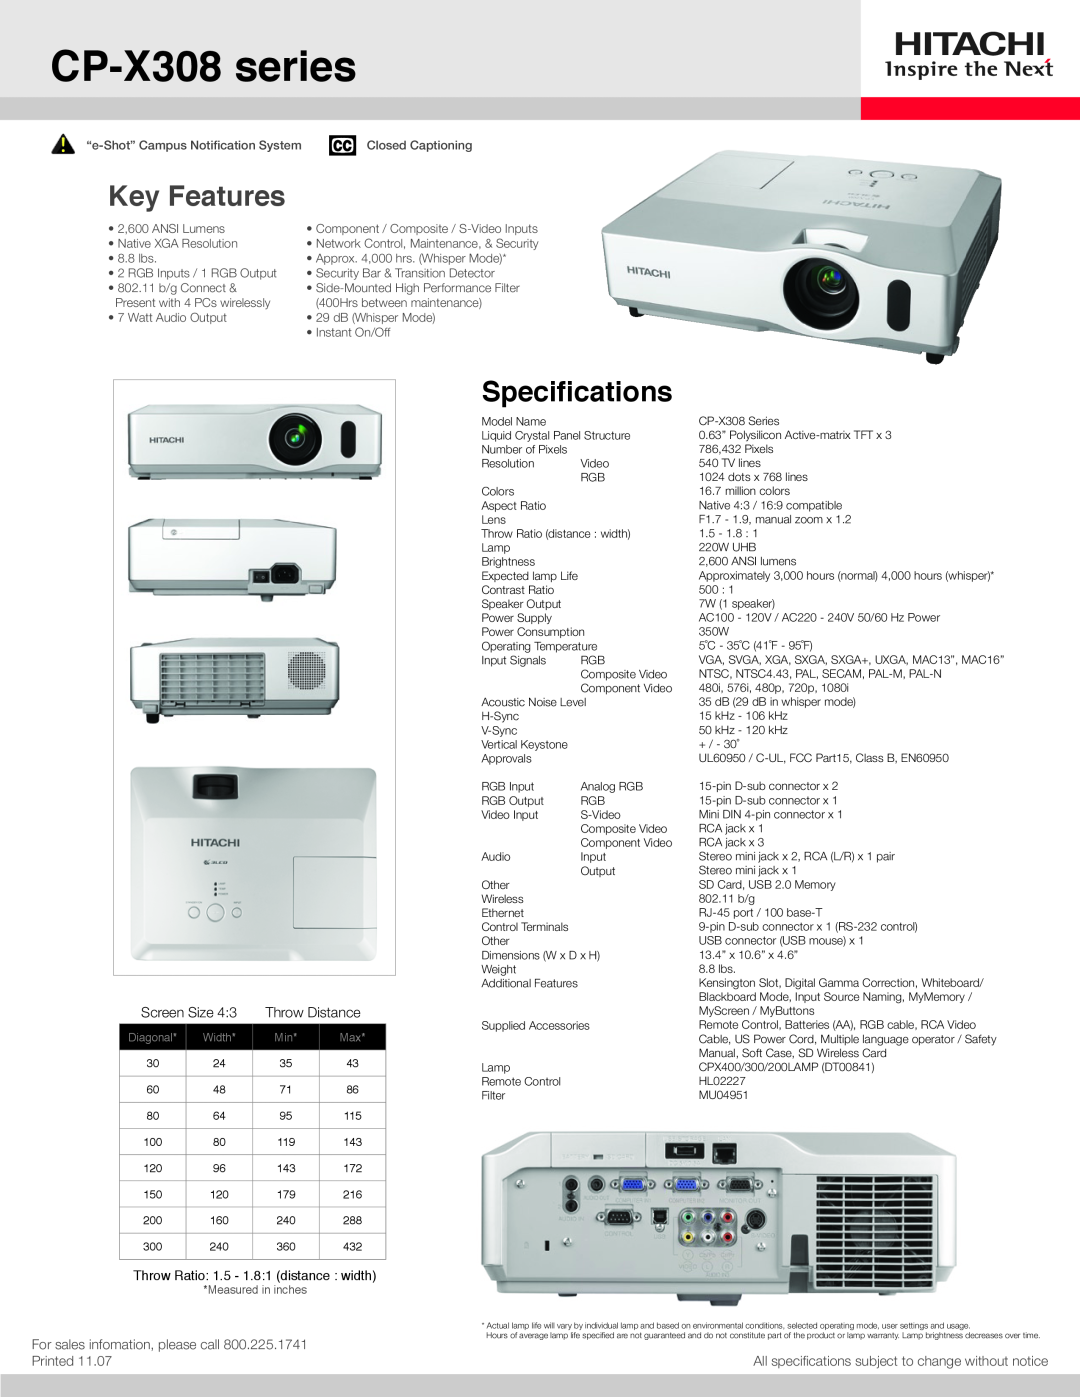 Hitachi CP-X400 specifications CP-X308series, Key Features, Specifications, Screen Size, Throw Distance, Printed, Diagonal 